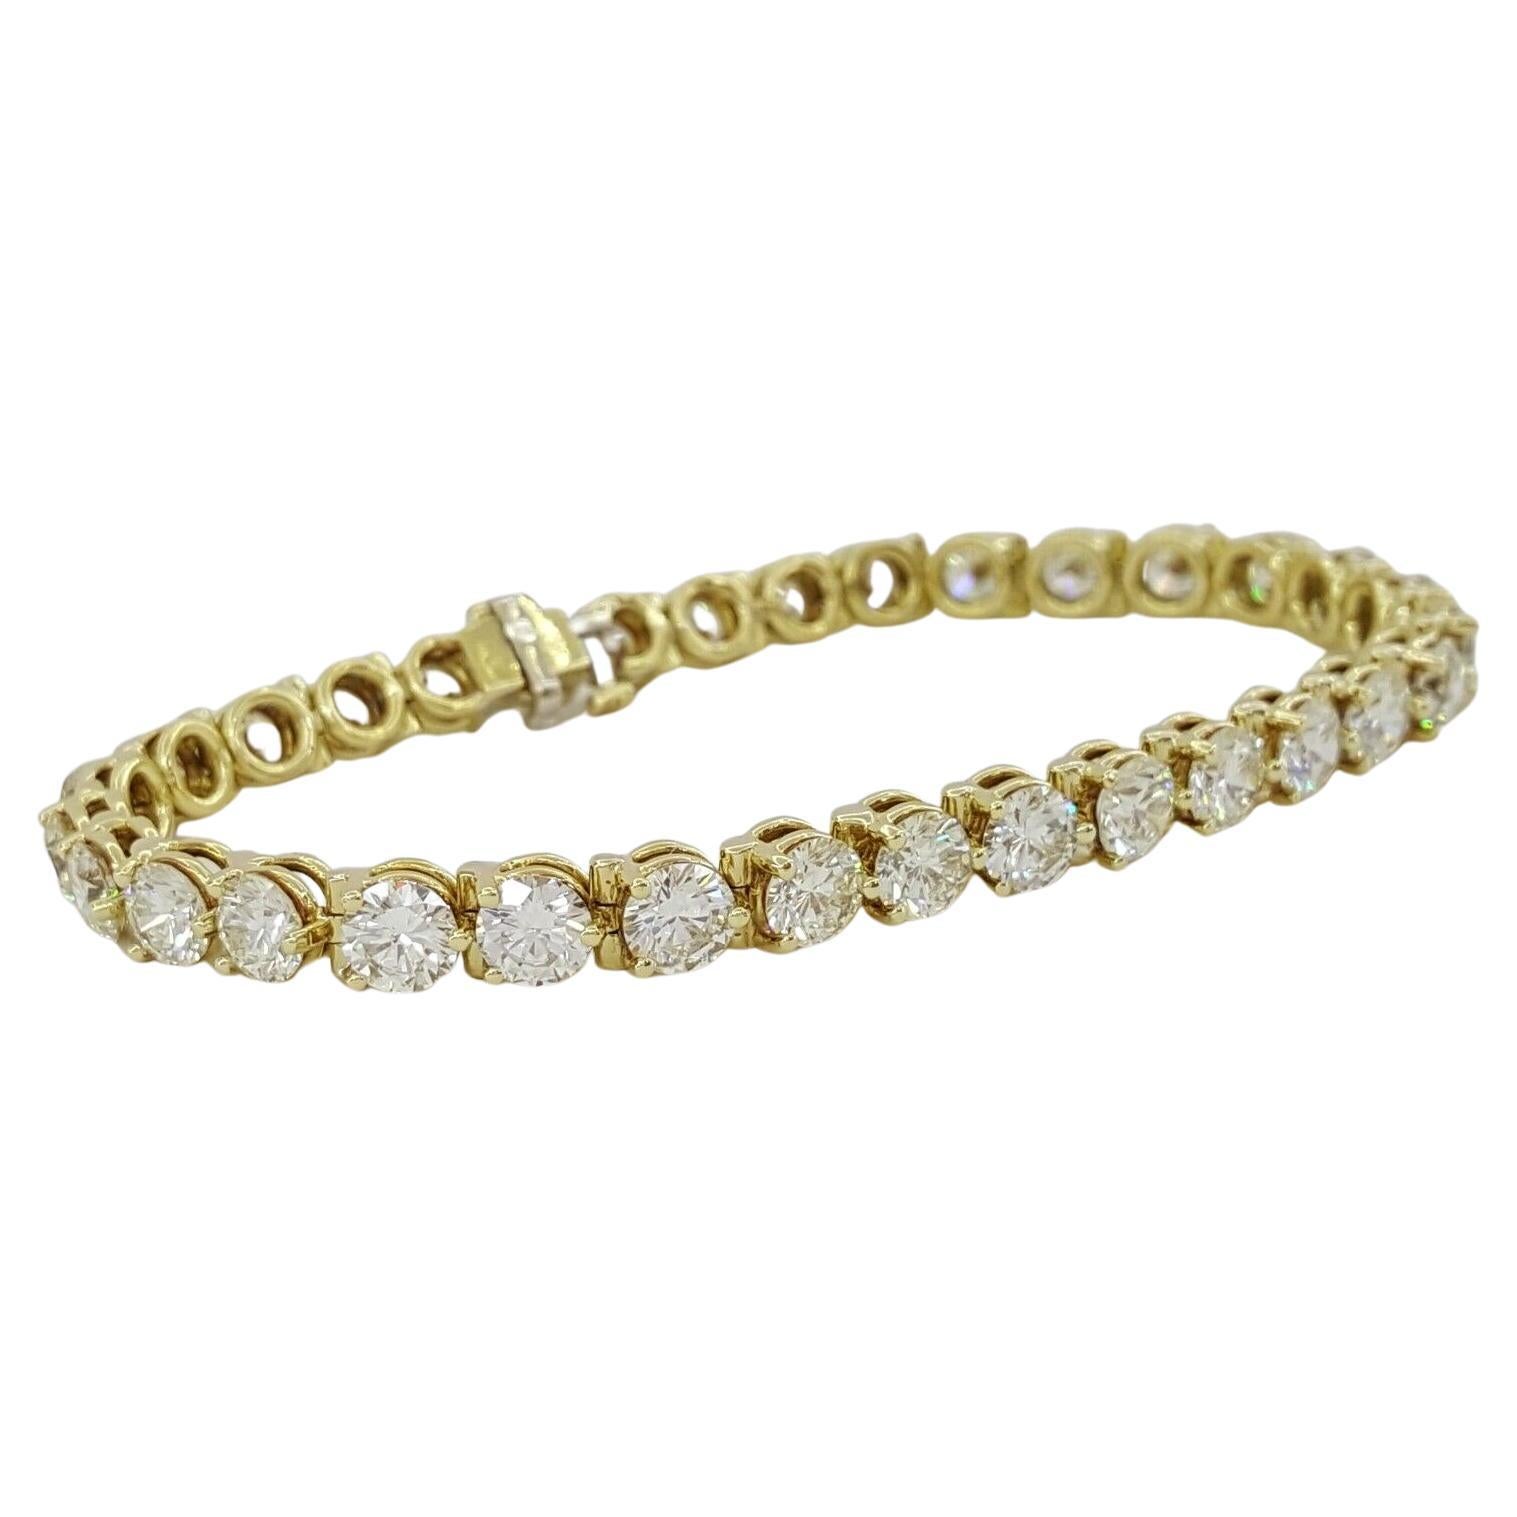 13 ct total weight Round Brilliant Cut Diamond 18K Yellow Gold Tennis Bracelet For Sale